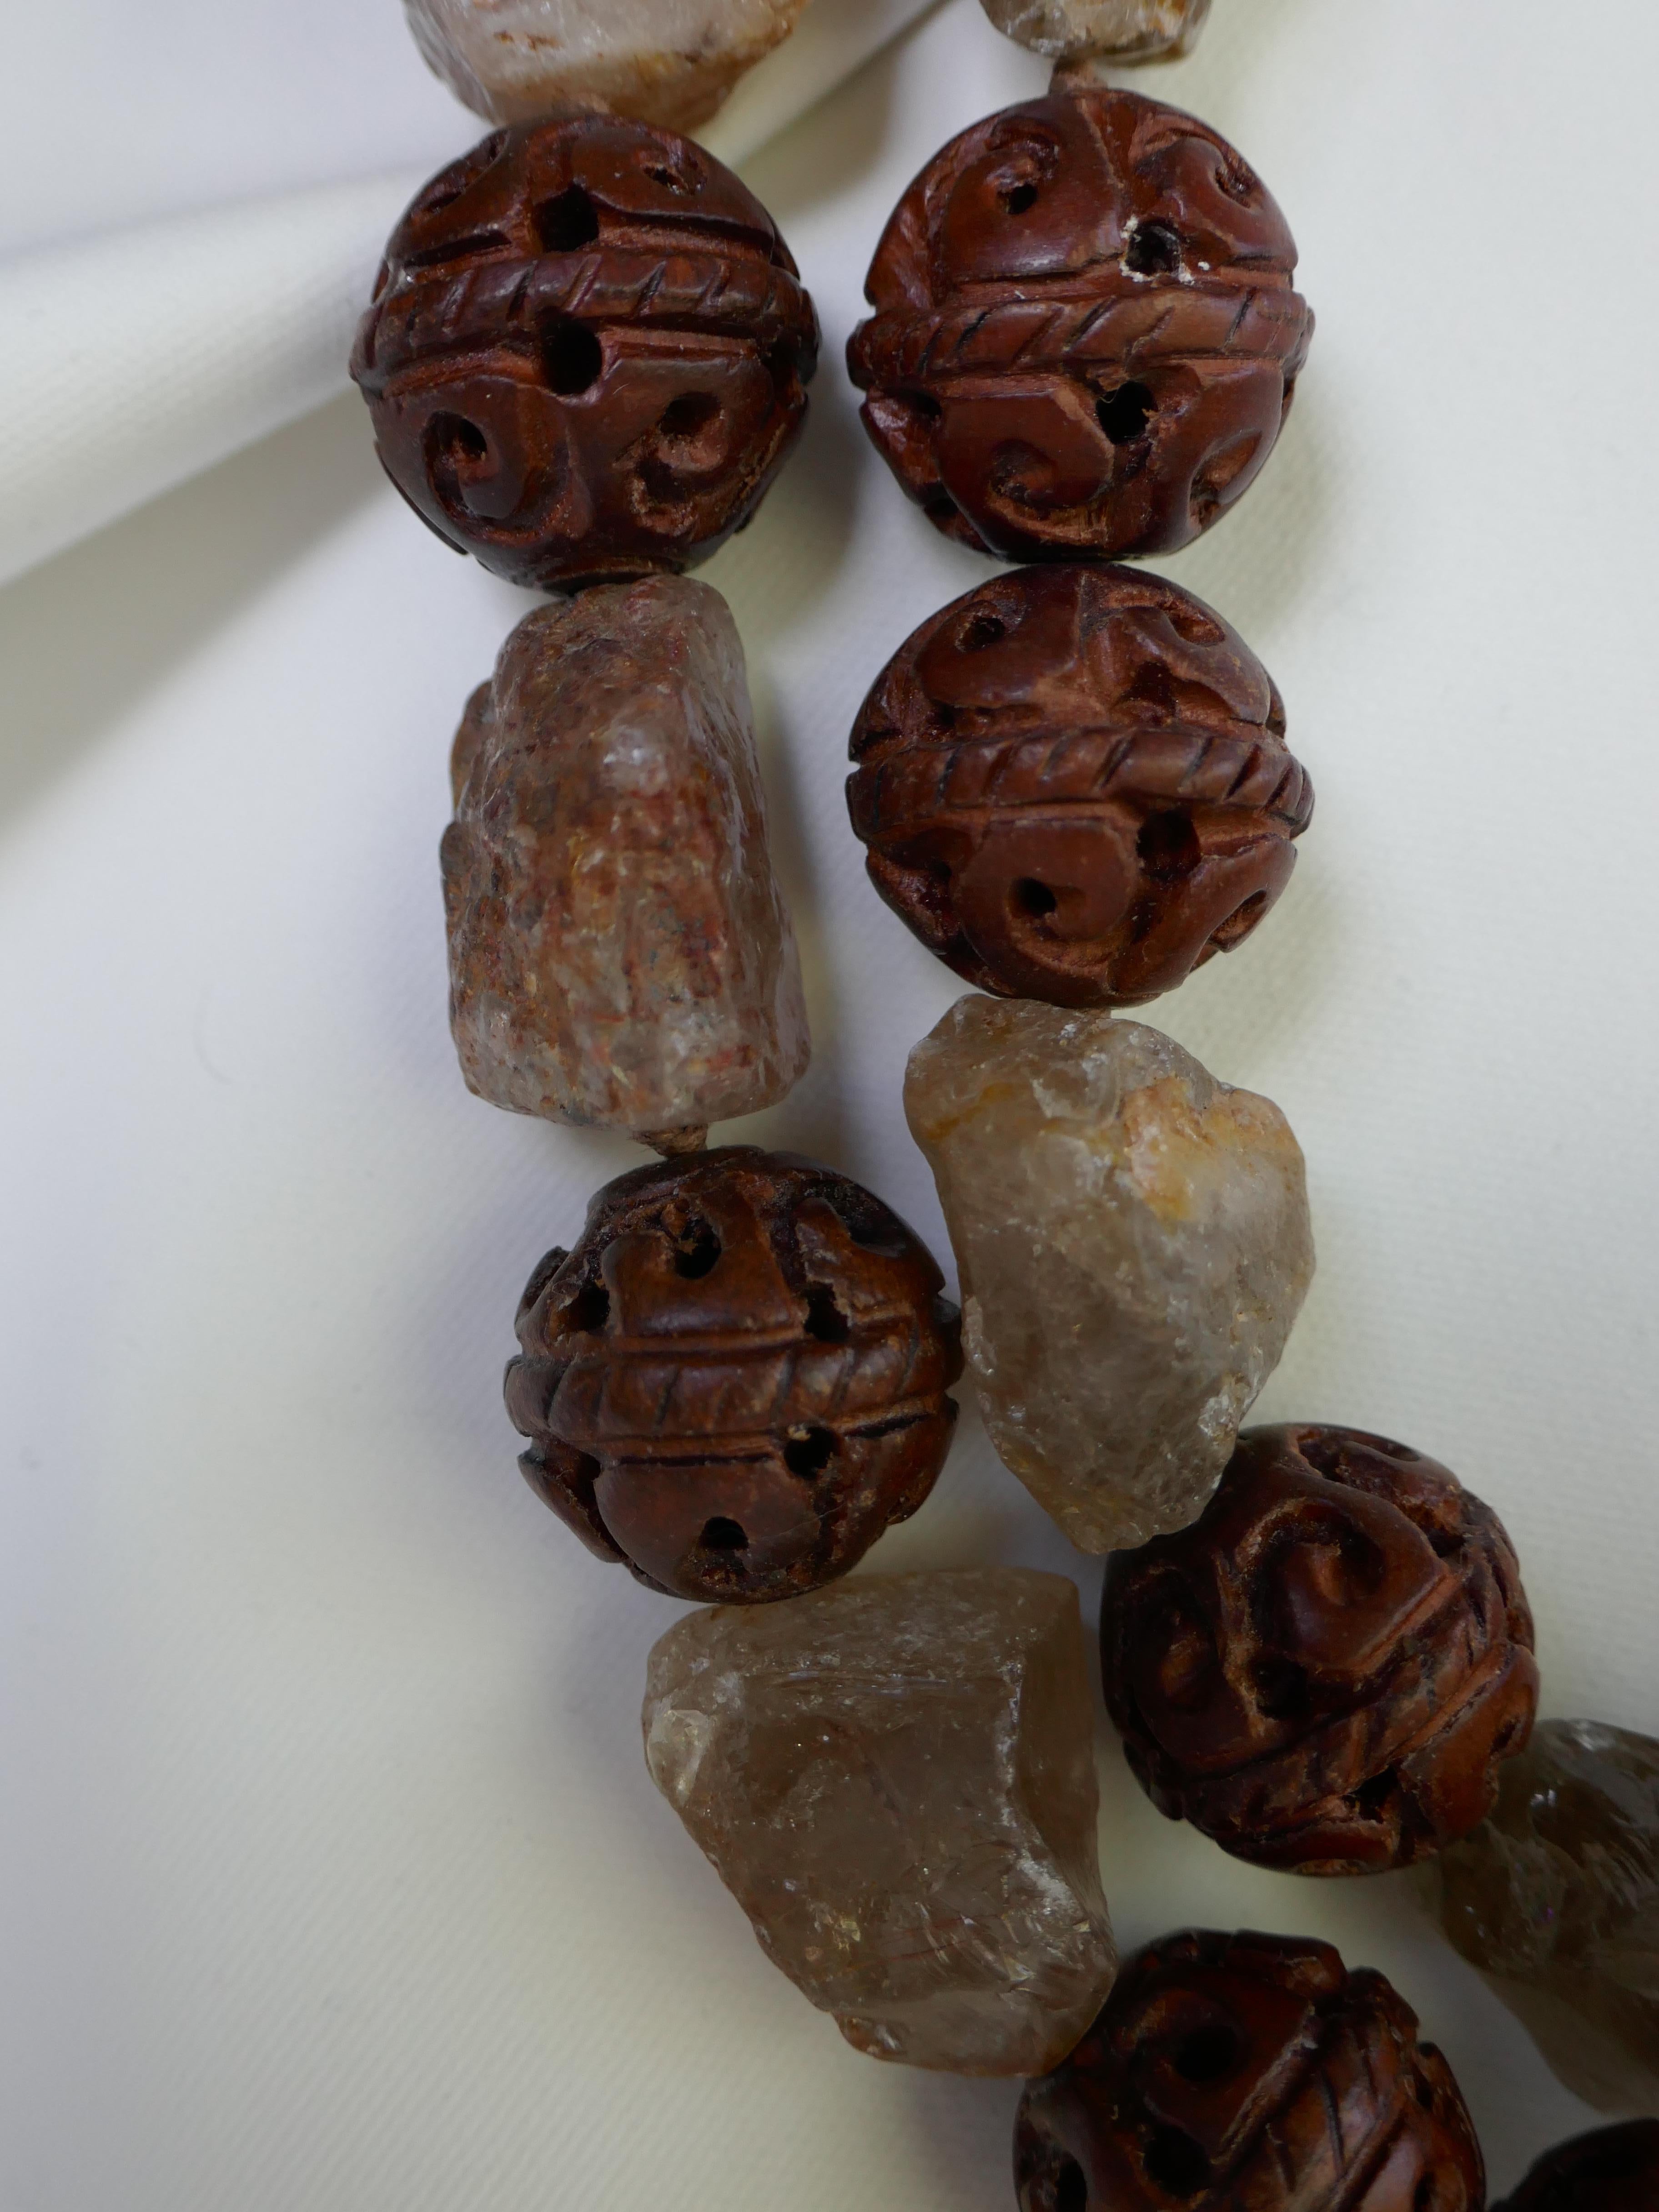 These are two necklace that may be worn together of separately. Worn together they make a stunning statement necklace. The carved wood beads are 20mm and interlace with unpolished Smokey quartz nuggets.  The shorter wood and Smokey quartz necklace